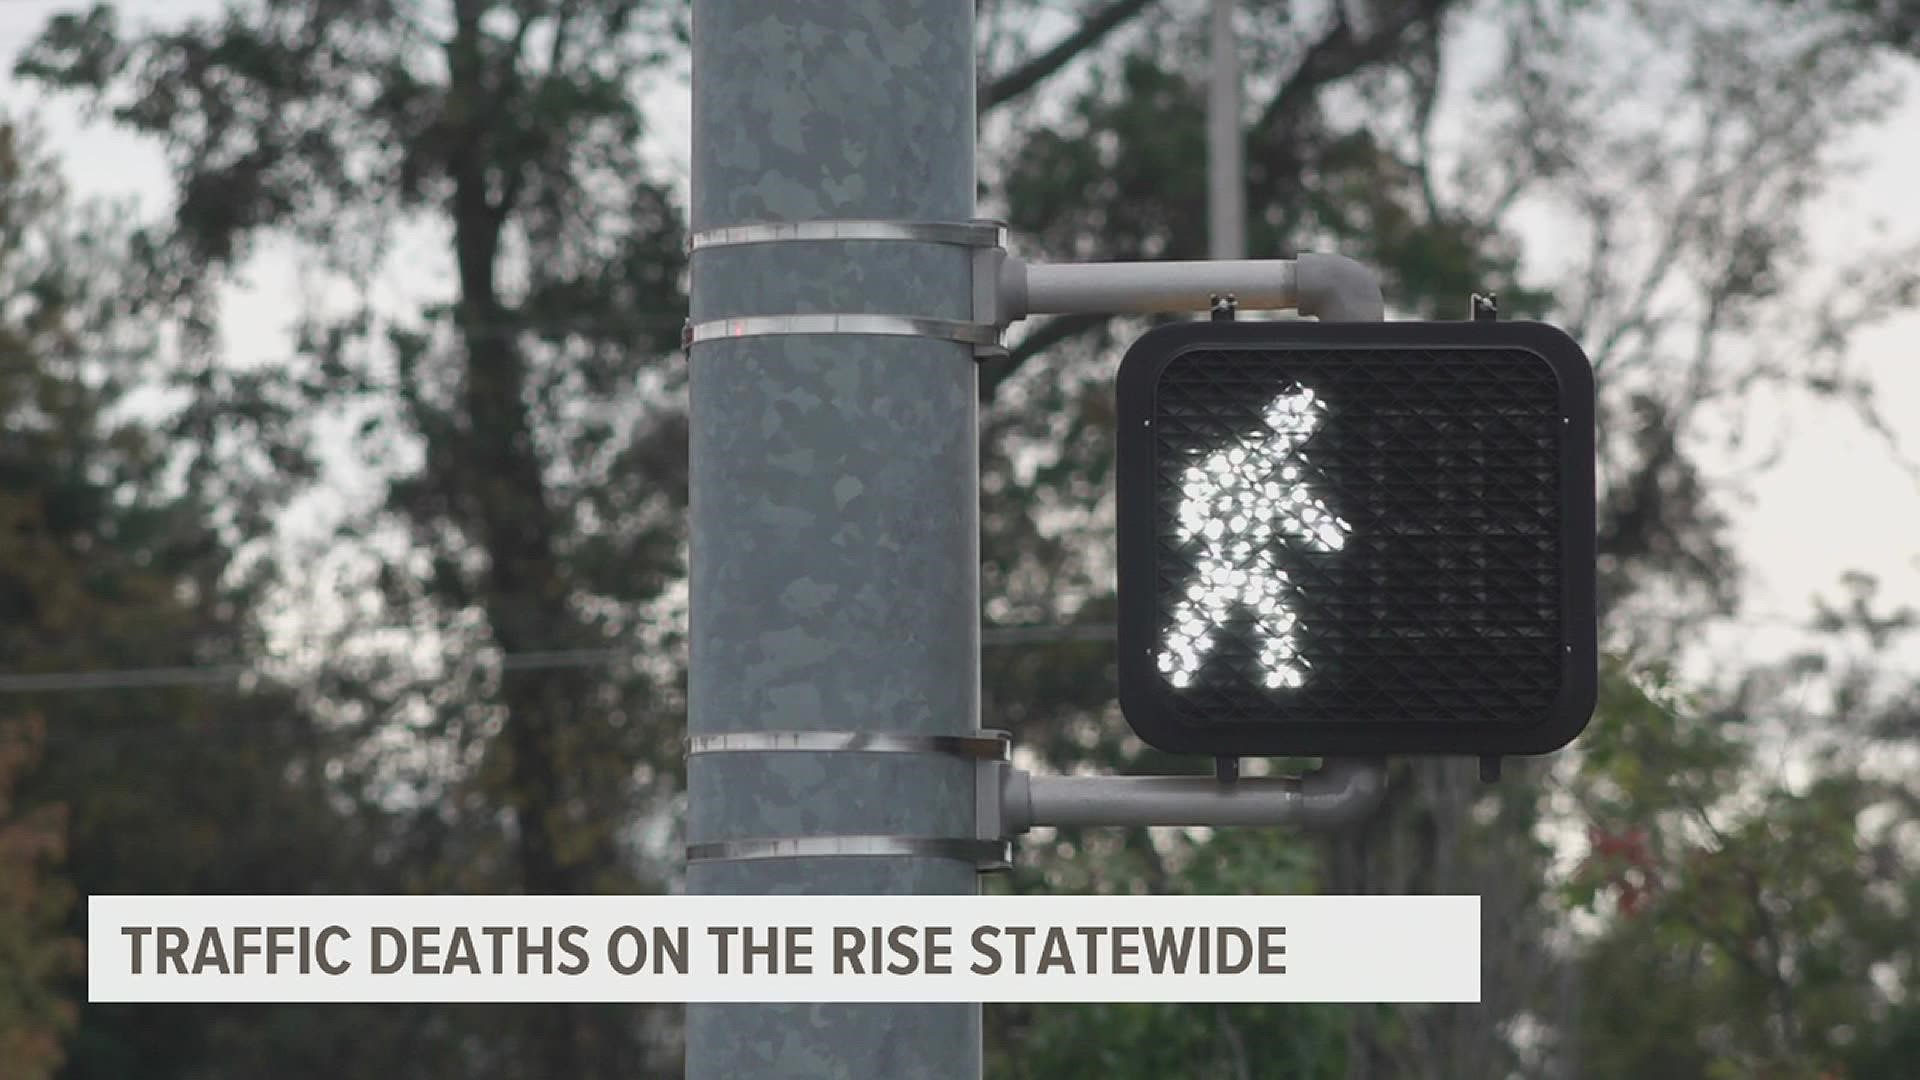 According the Governor's Highway Safety Association, pedestrian deaths increased from 146 in 2020 to 186 in 2021.